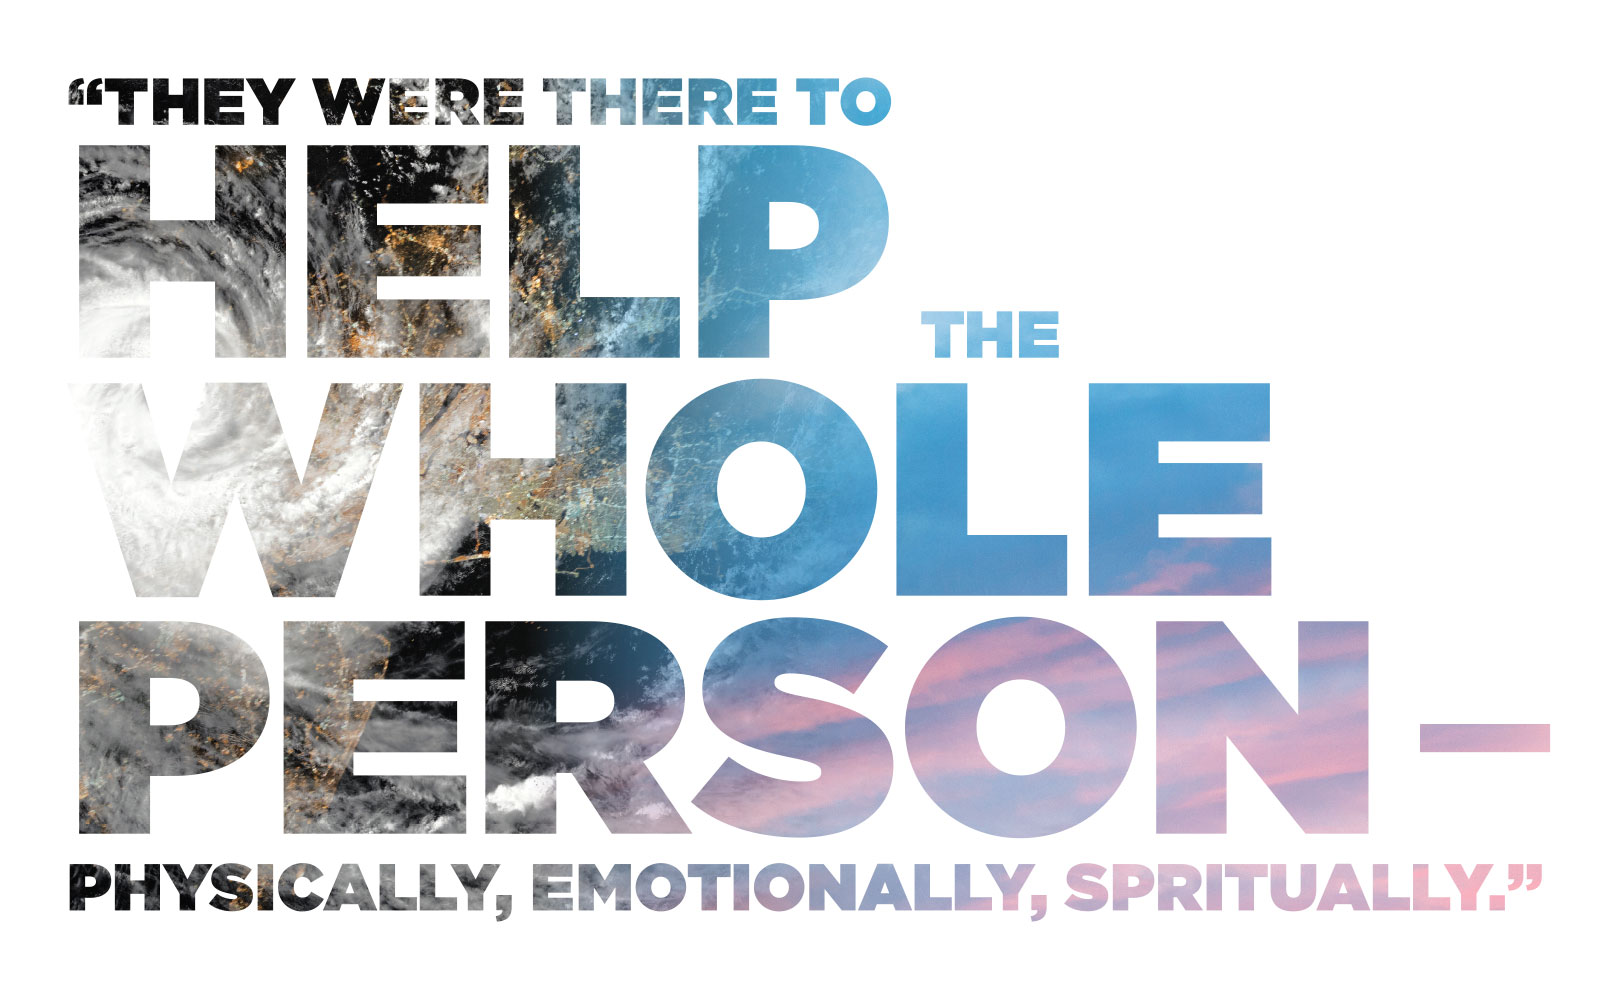 Big Quotation: "THEY WERE THERE TO HELP THE WHOLE PERSON—PHYSICALLY, EMOTIONALLY, SPIRITUALLY."